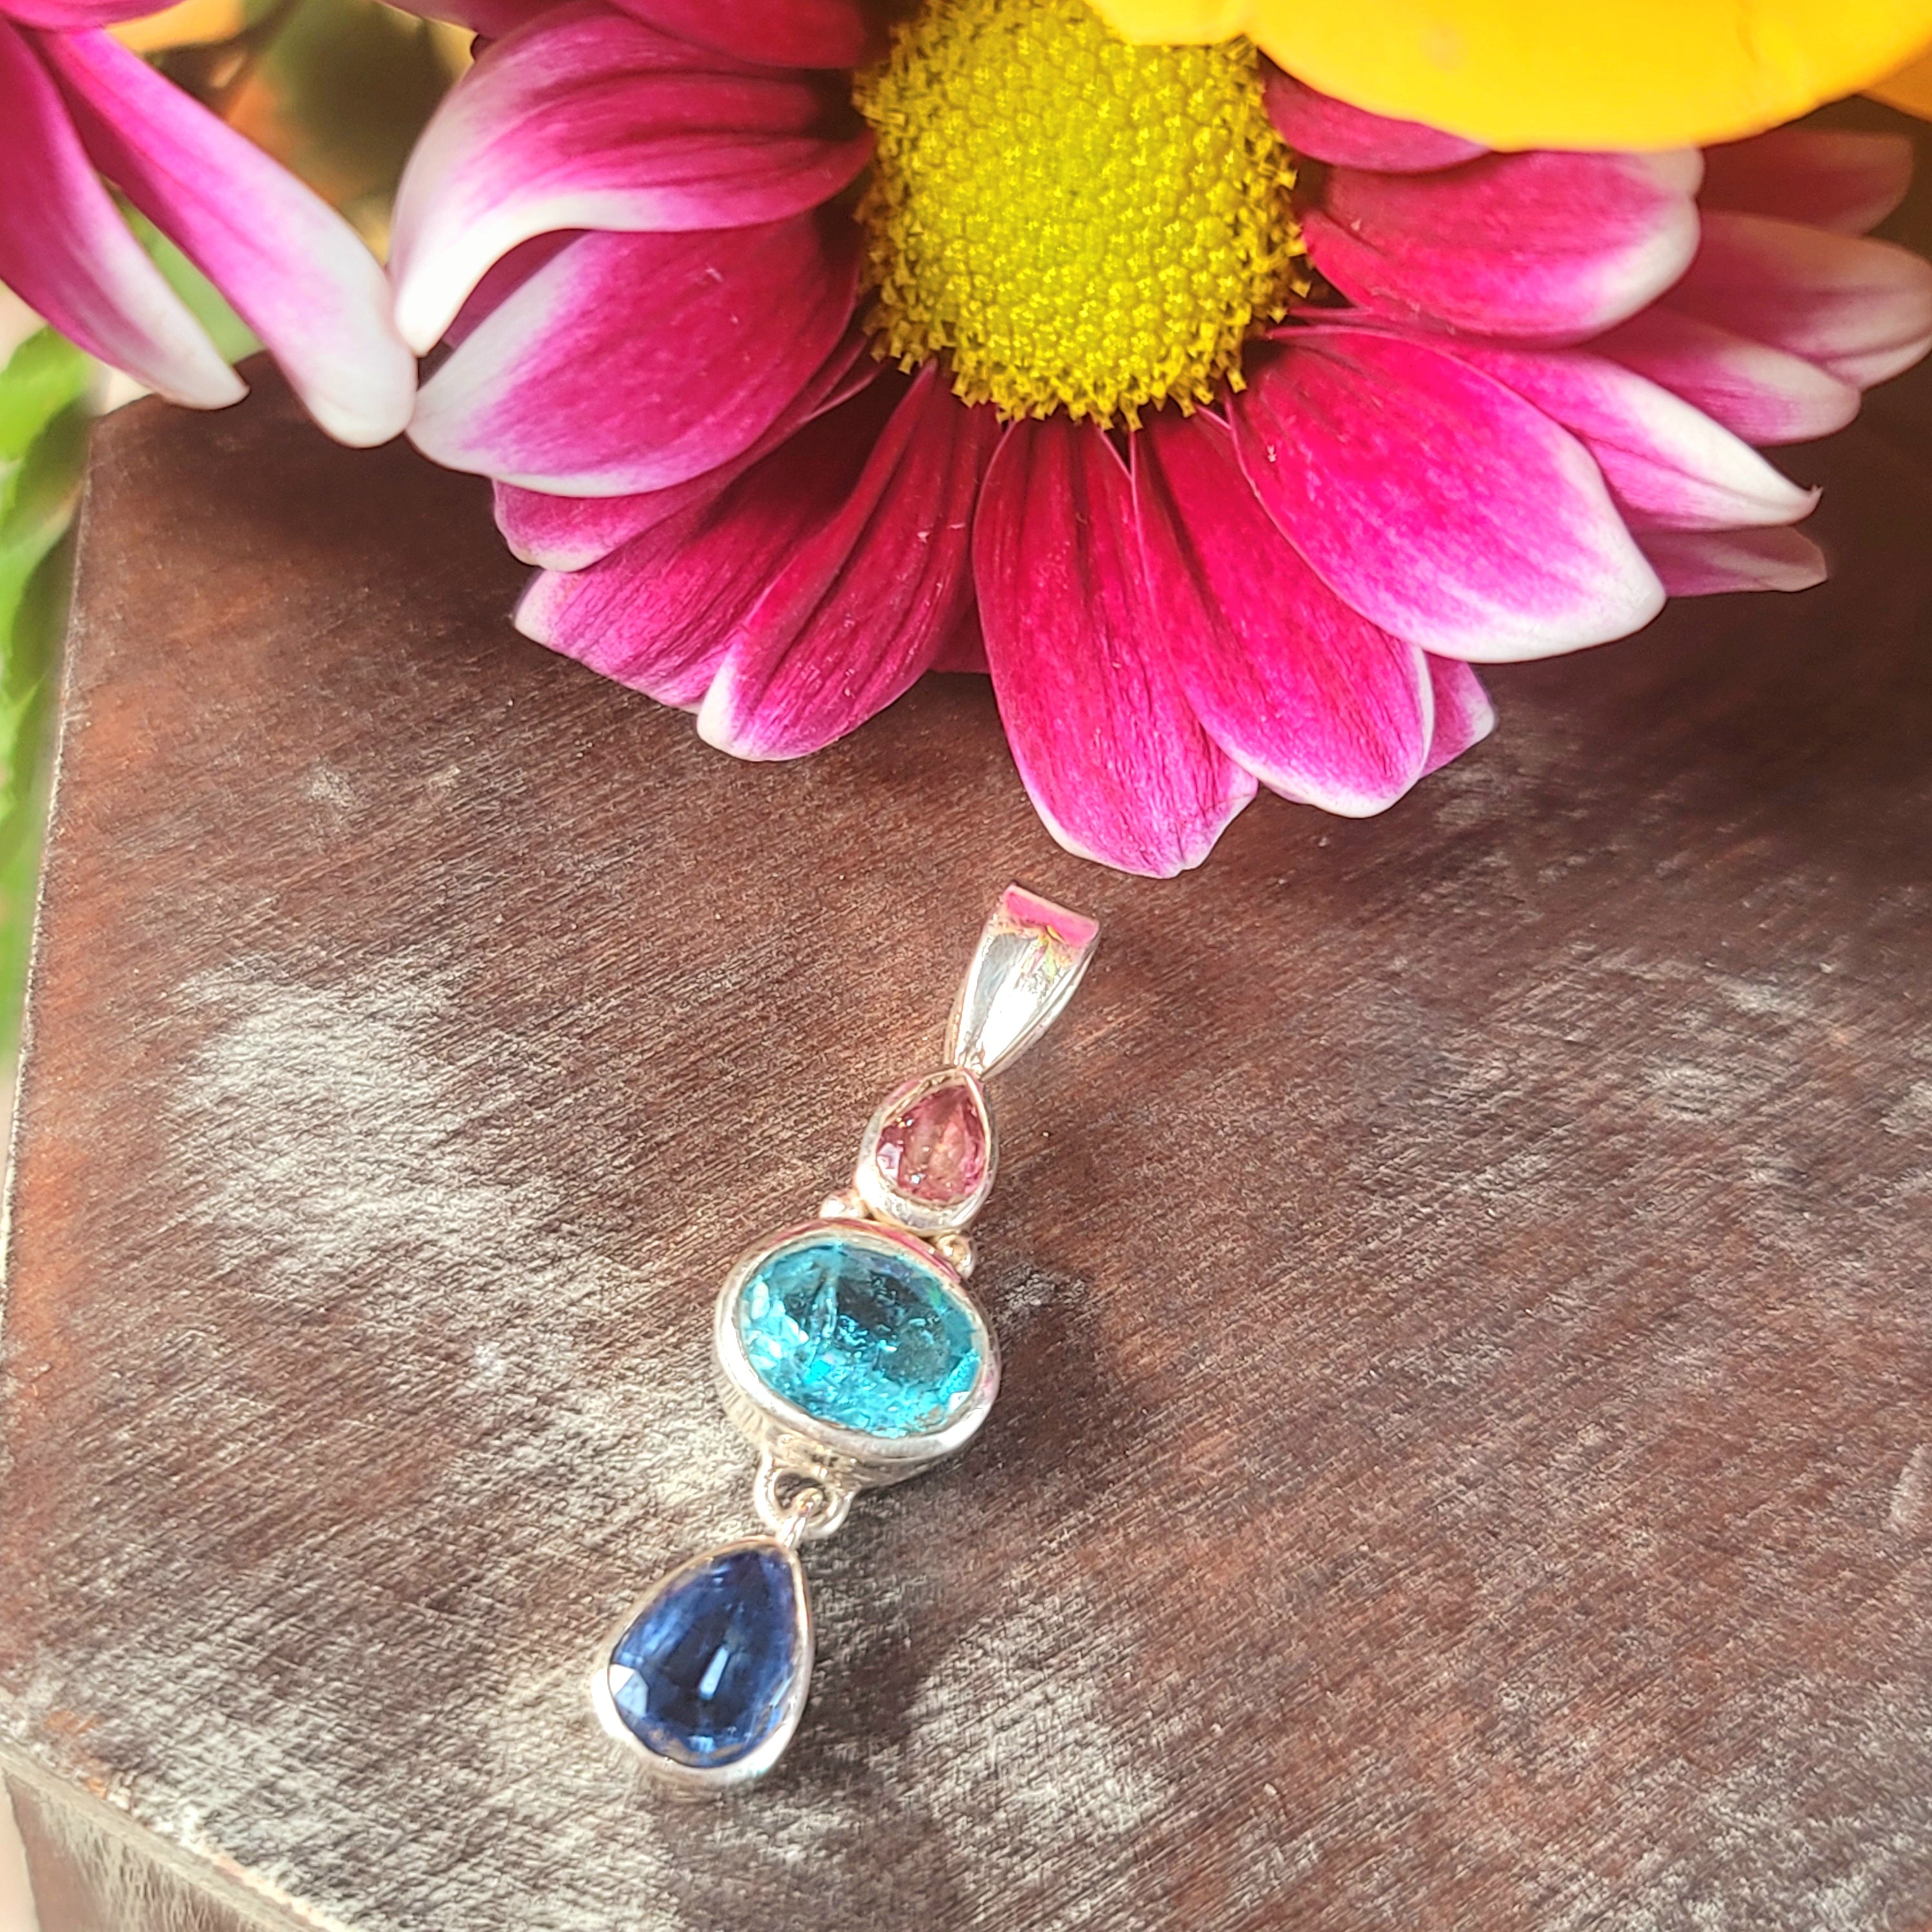 Blue Kyanite x Blue Apatite X Pink Tourmaline .925 Silver Pendant for Support on a New Beginning